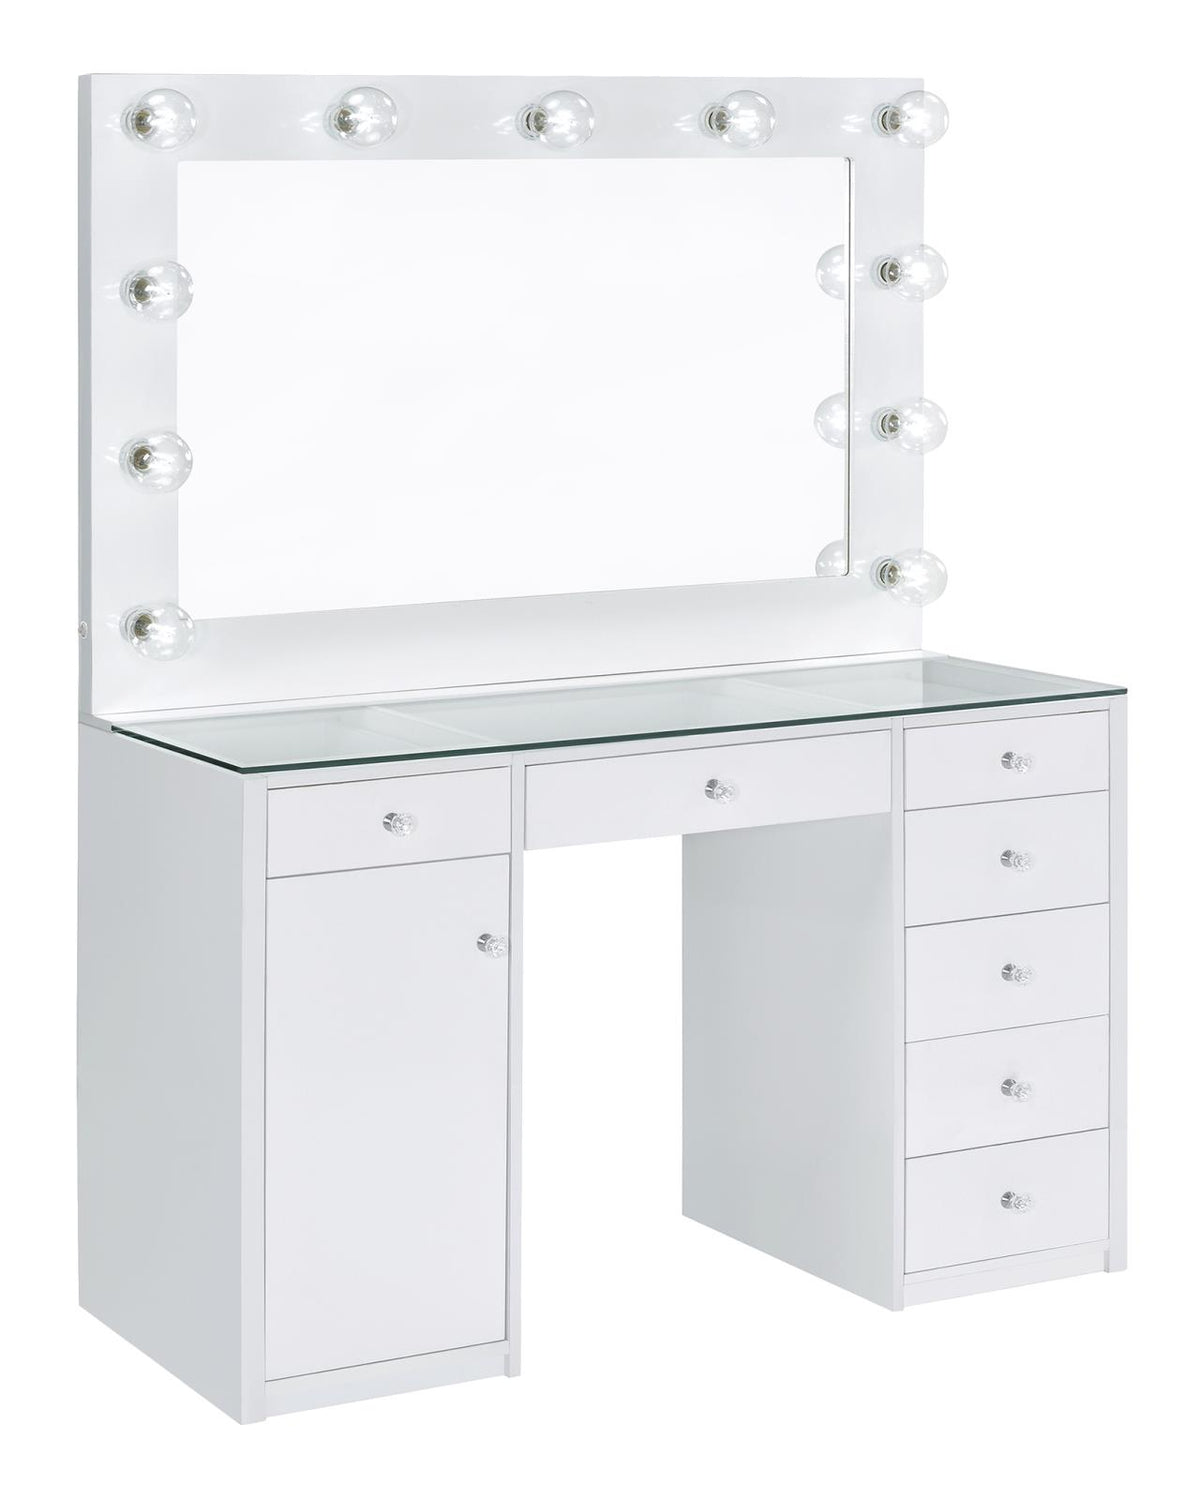 Percy 7-drawer Glass Top Vanity Desk with Lighting White Percy 7-drawer Glass Top Vanity Desk with Lighting White Half Price Furniture